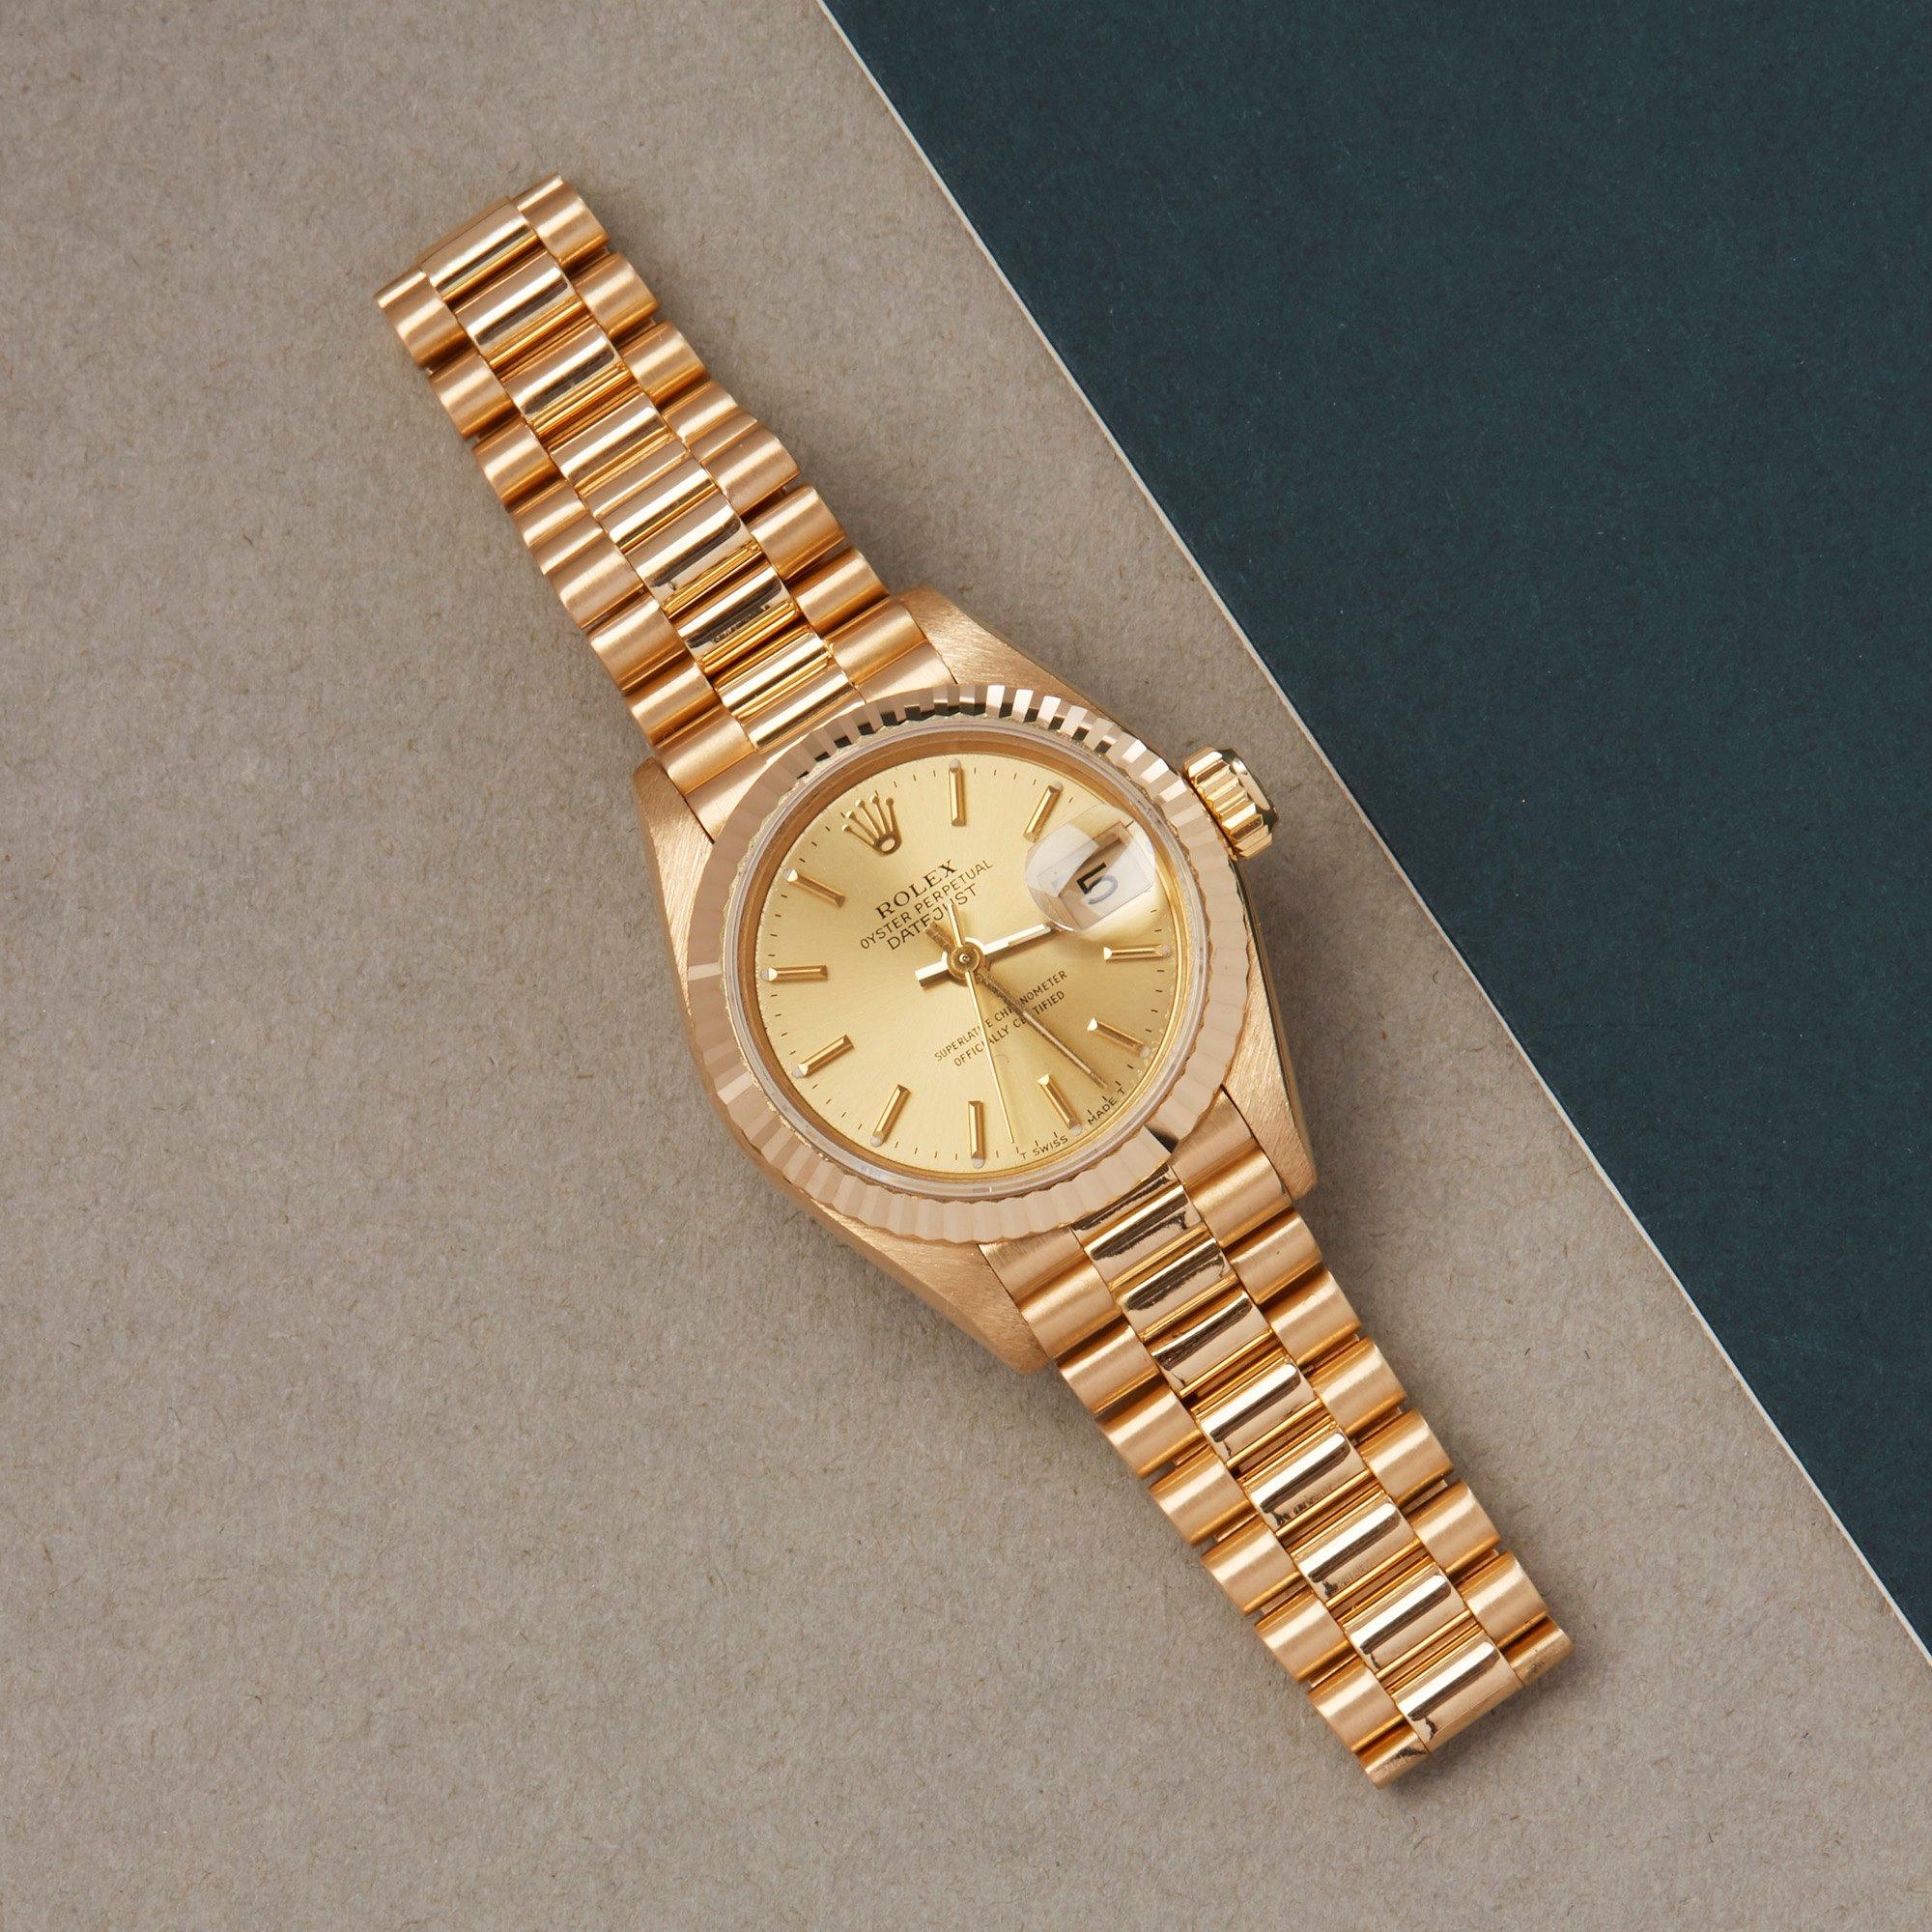 Xupes Reference: W007508
Manufacturer: Rolex
Model: Datejust
Model Variant: 26
Model Number: 69178
Age: 1993
Gender: Ladies
Complete With: Rolex Box & Service Pouch
Dial: Champagne Baton
Glass: Sapphire Crystal
Case Size: 26mm
Case Material: Yellow